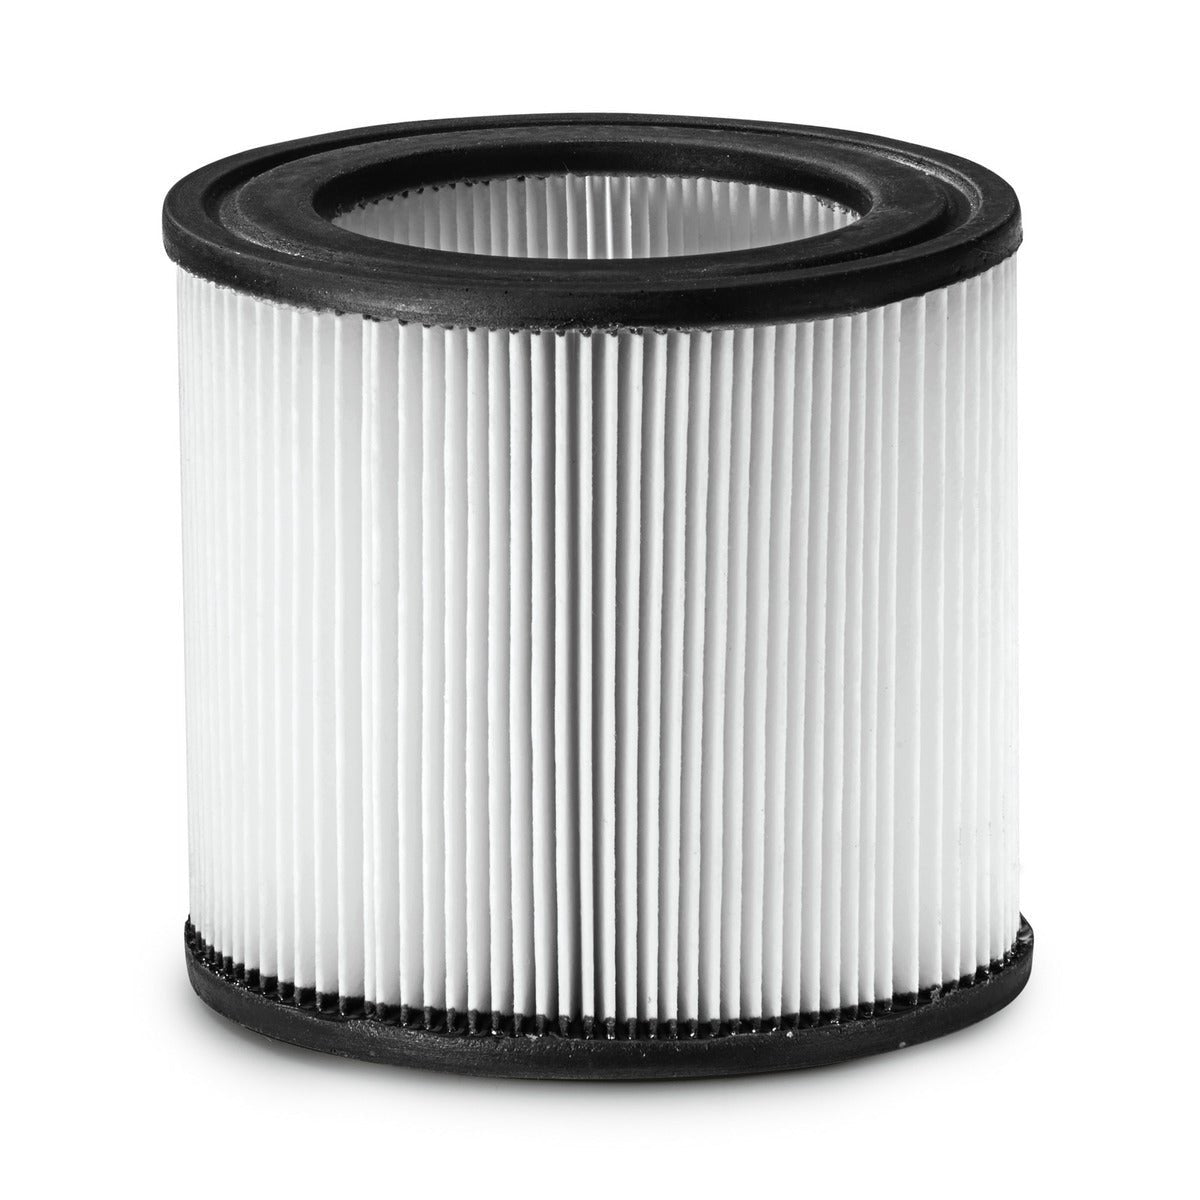 Cartridge filter PES, suitable for NT 22 1 Ap, 27 1, 48 1